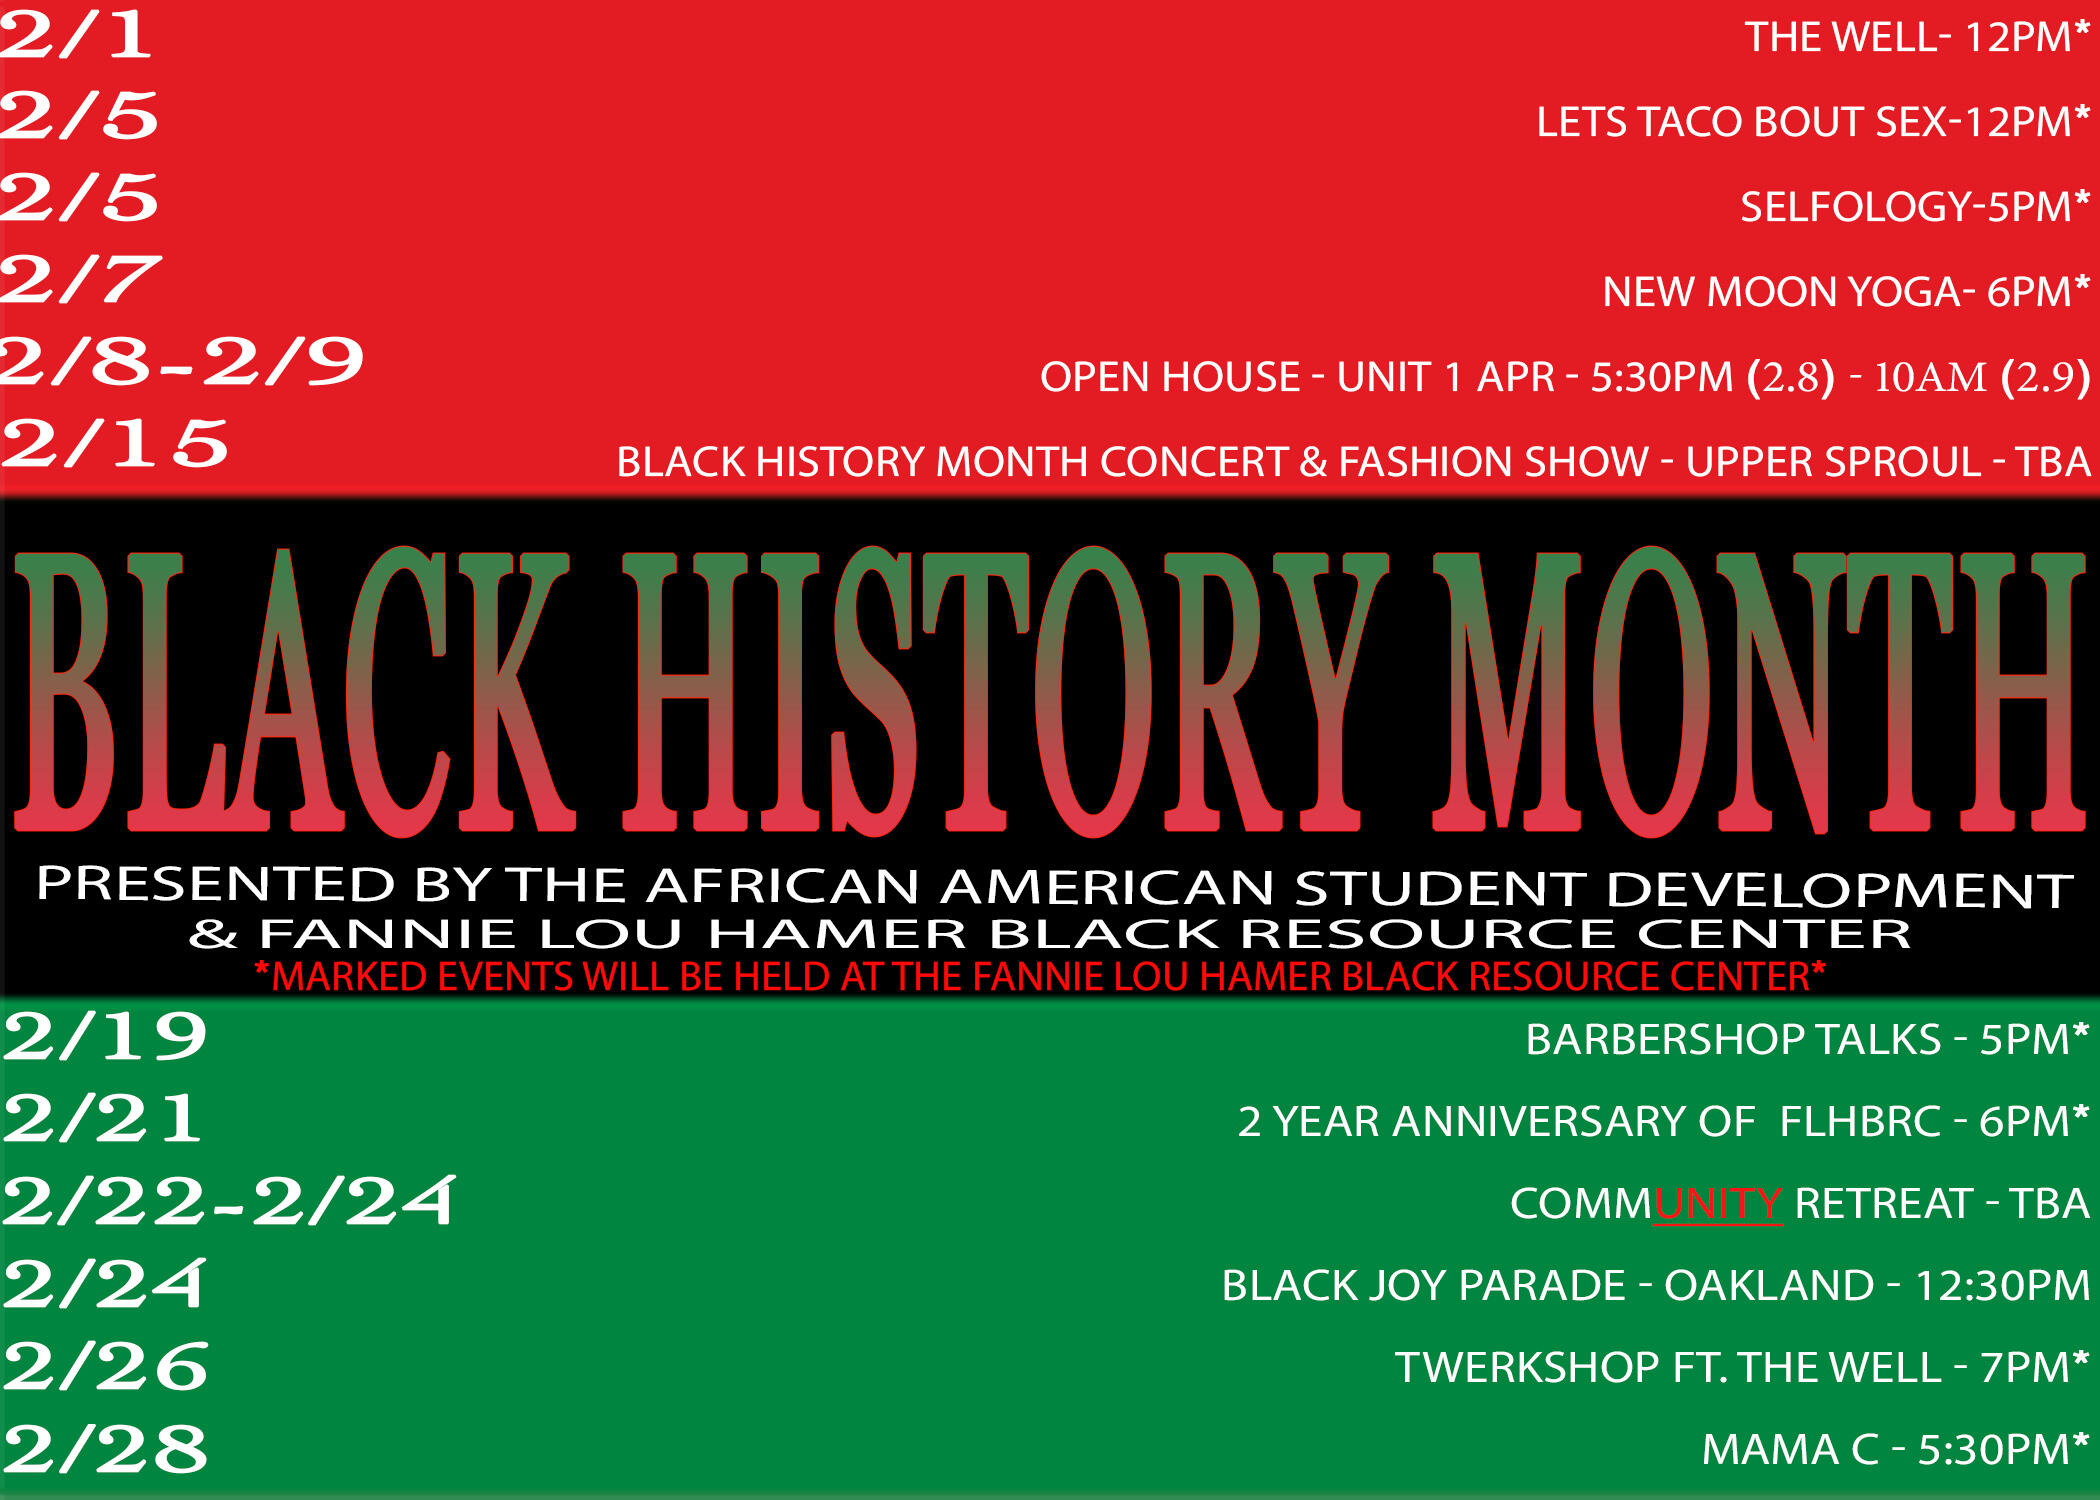 Flyer with events for Black History Month 2019